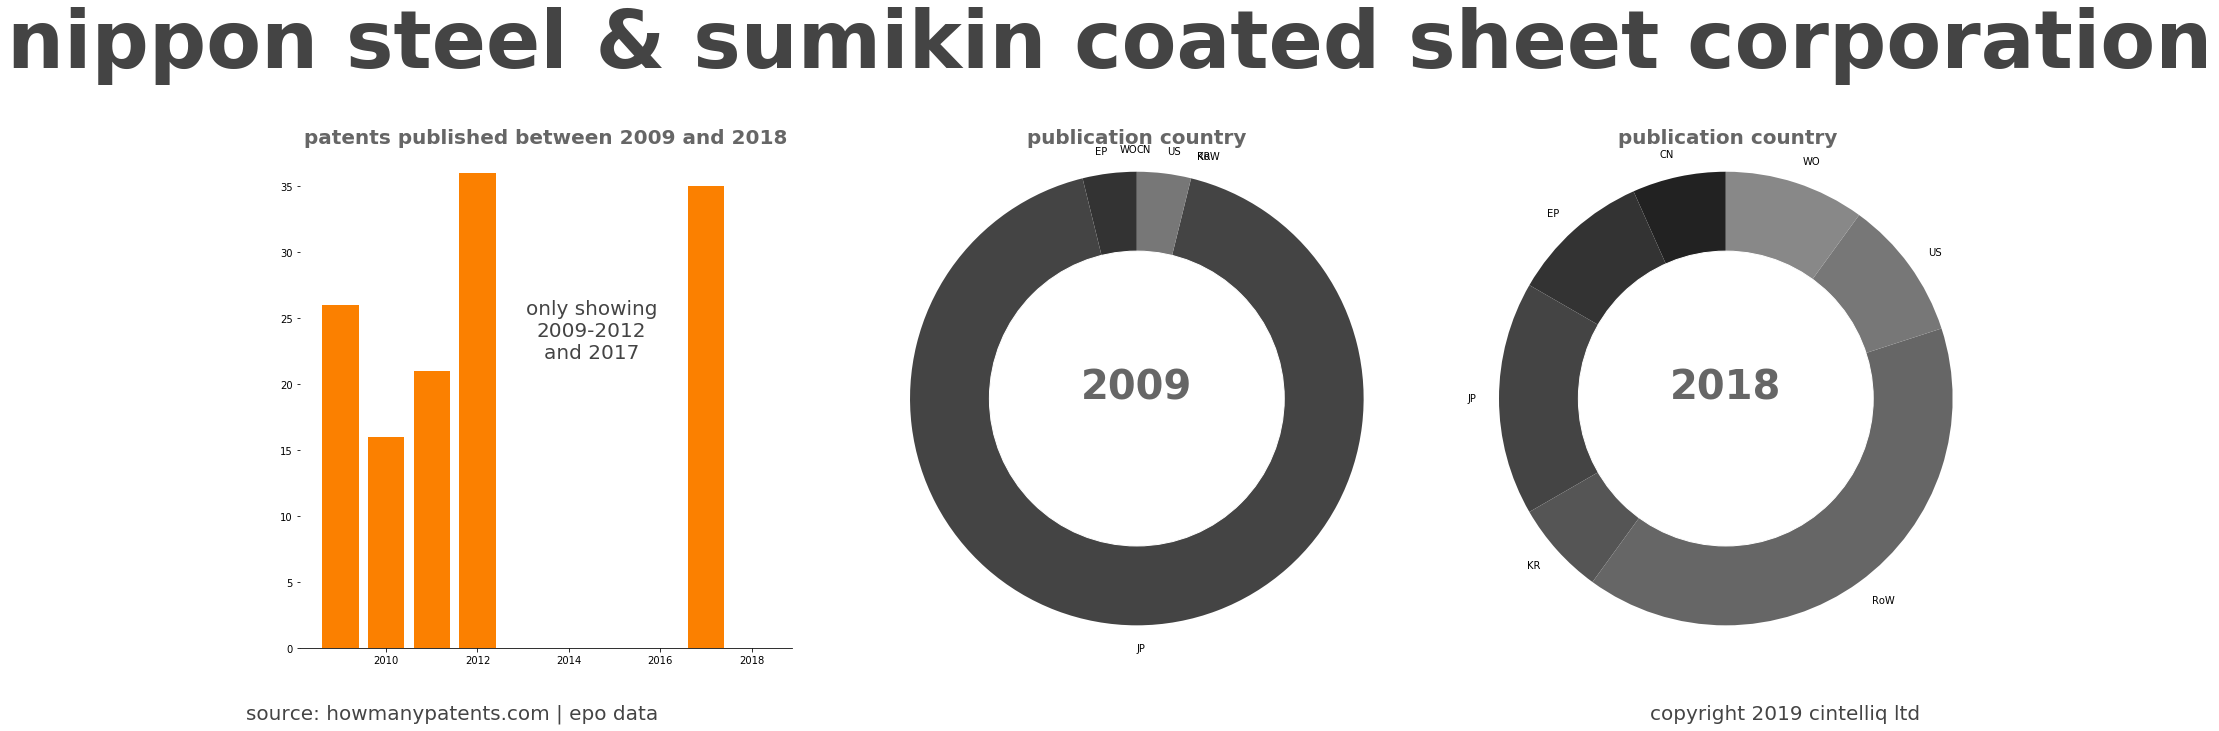 summary of patents for Nippon Steel & Sumikin Coated Sheet Corporation